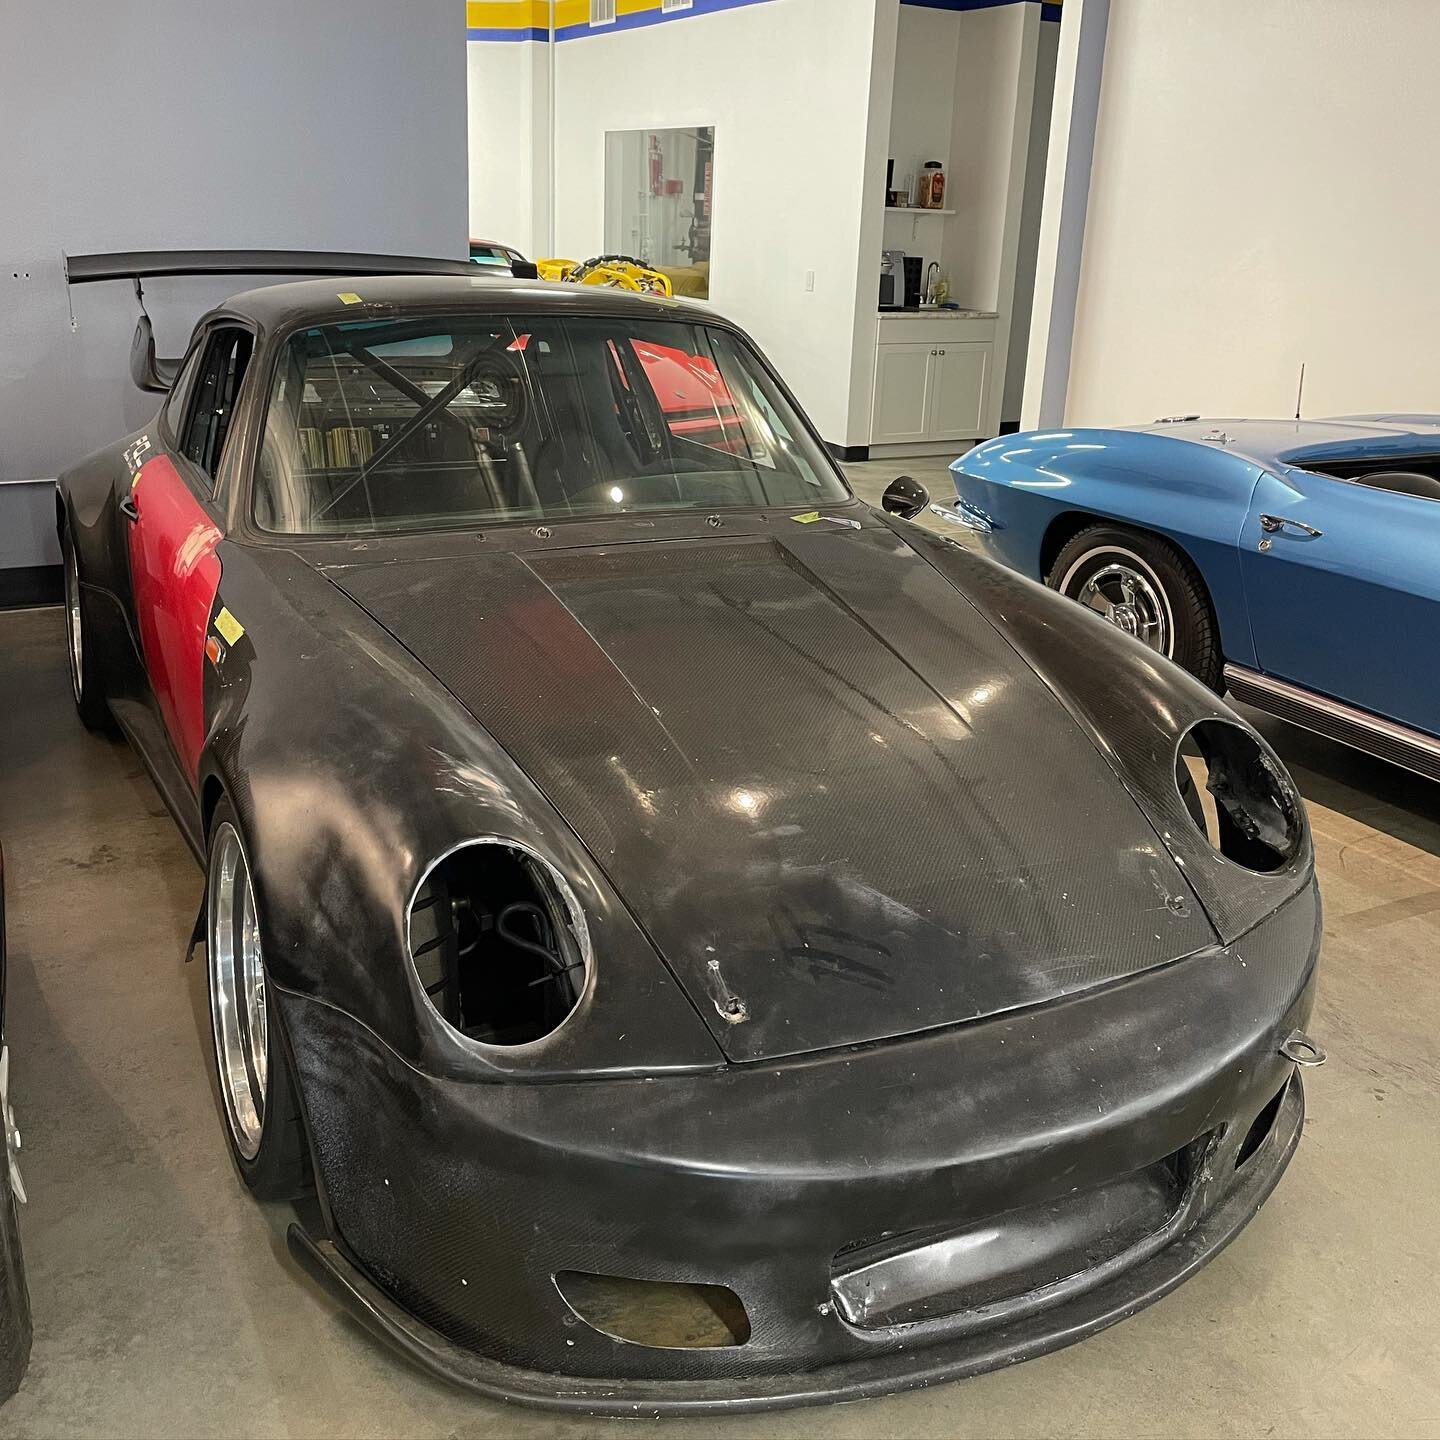 911 track car in line for some paint and body work. 

#ColorsandDesign #aircooled #911 #porsche911 #porsche